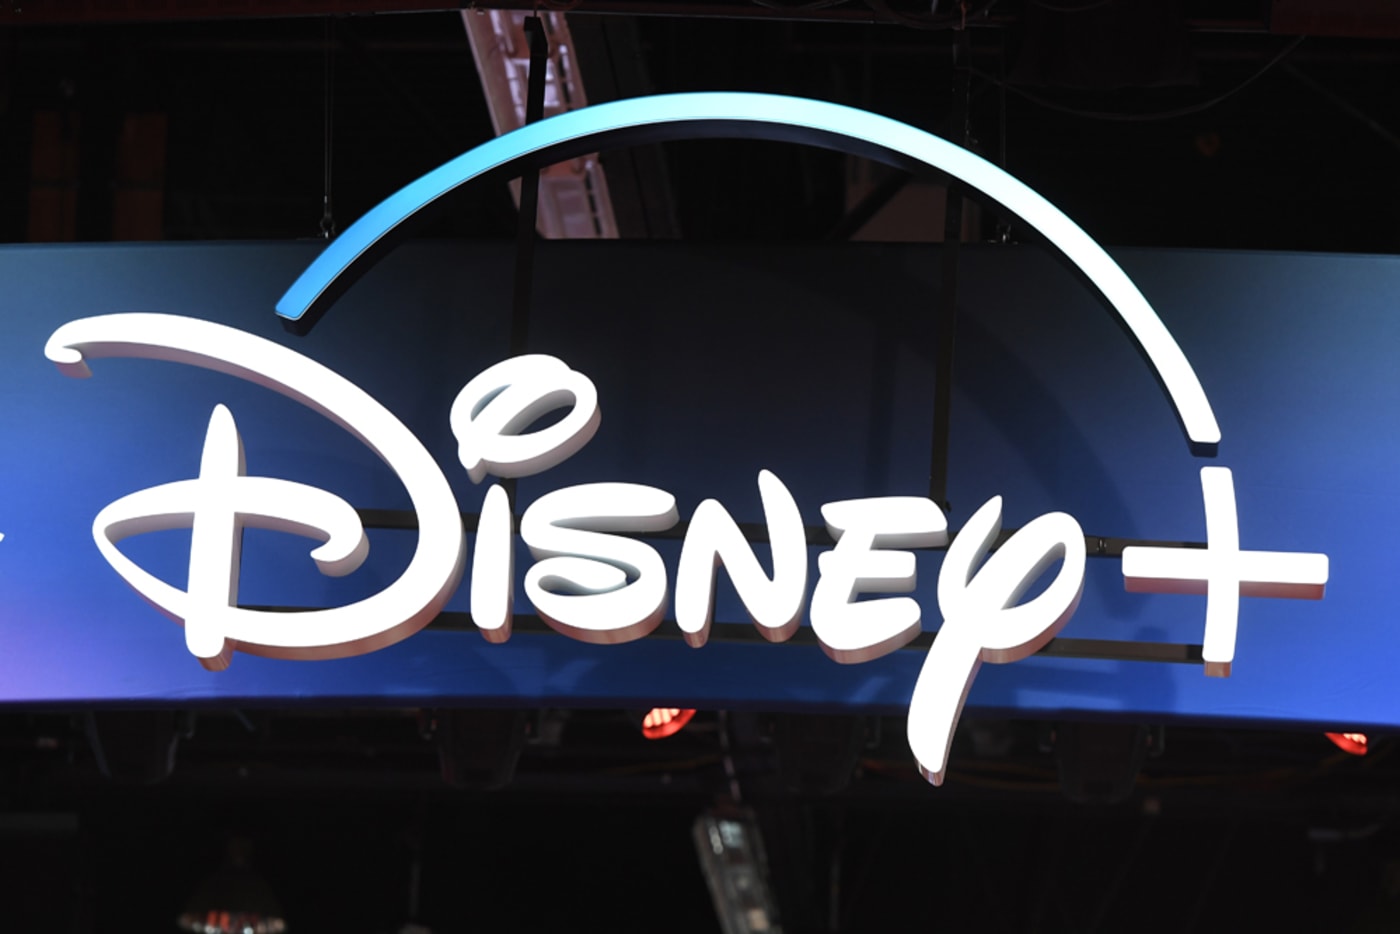 A Disney+ streaming service sign is pictured at the D23 Expo on August 23, 2019